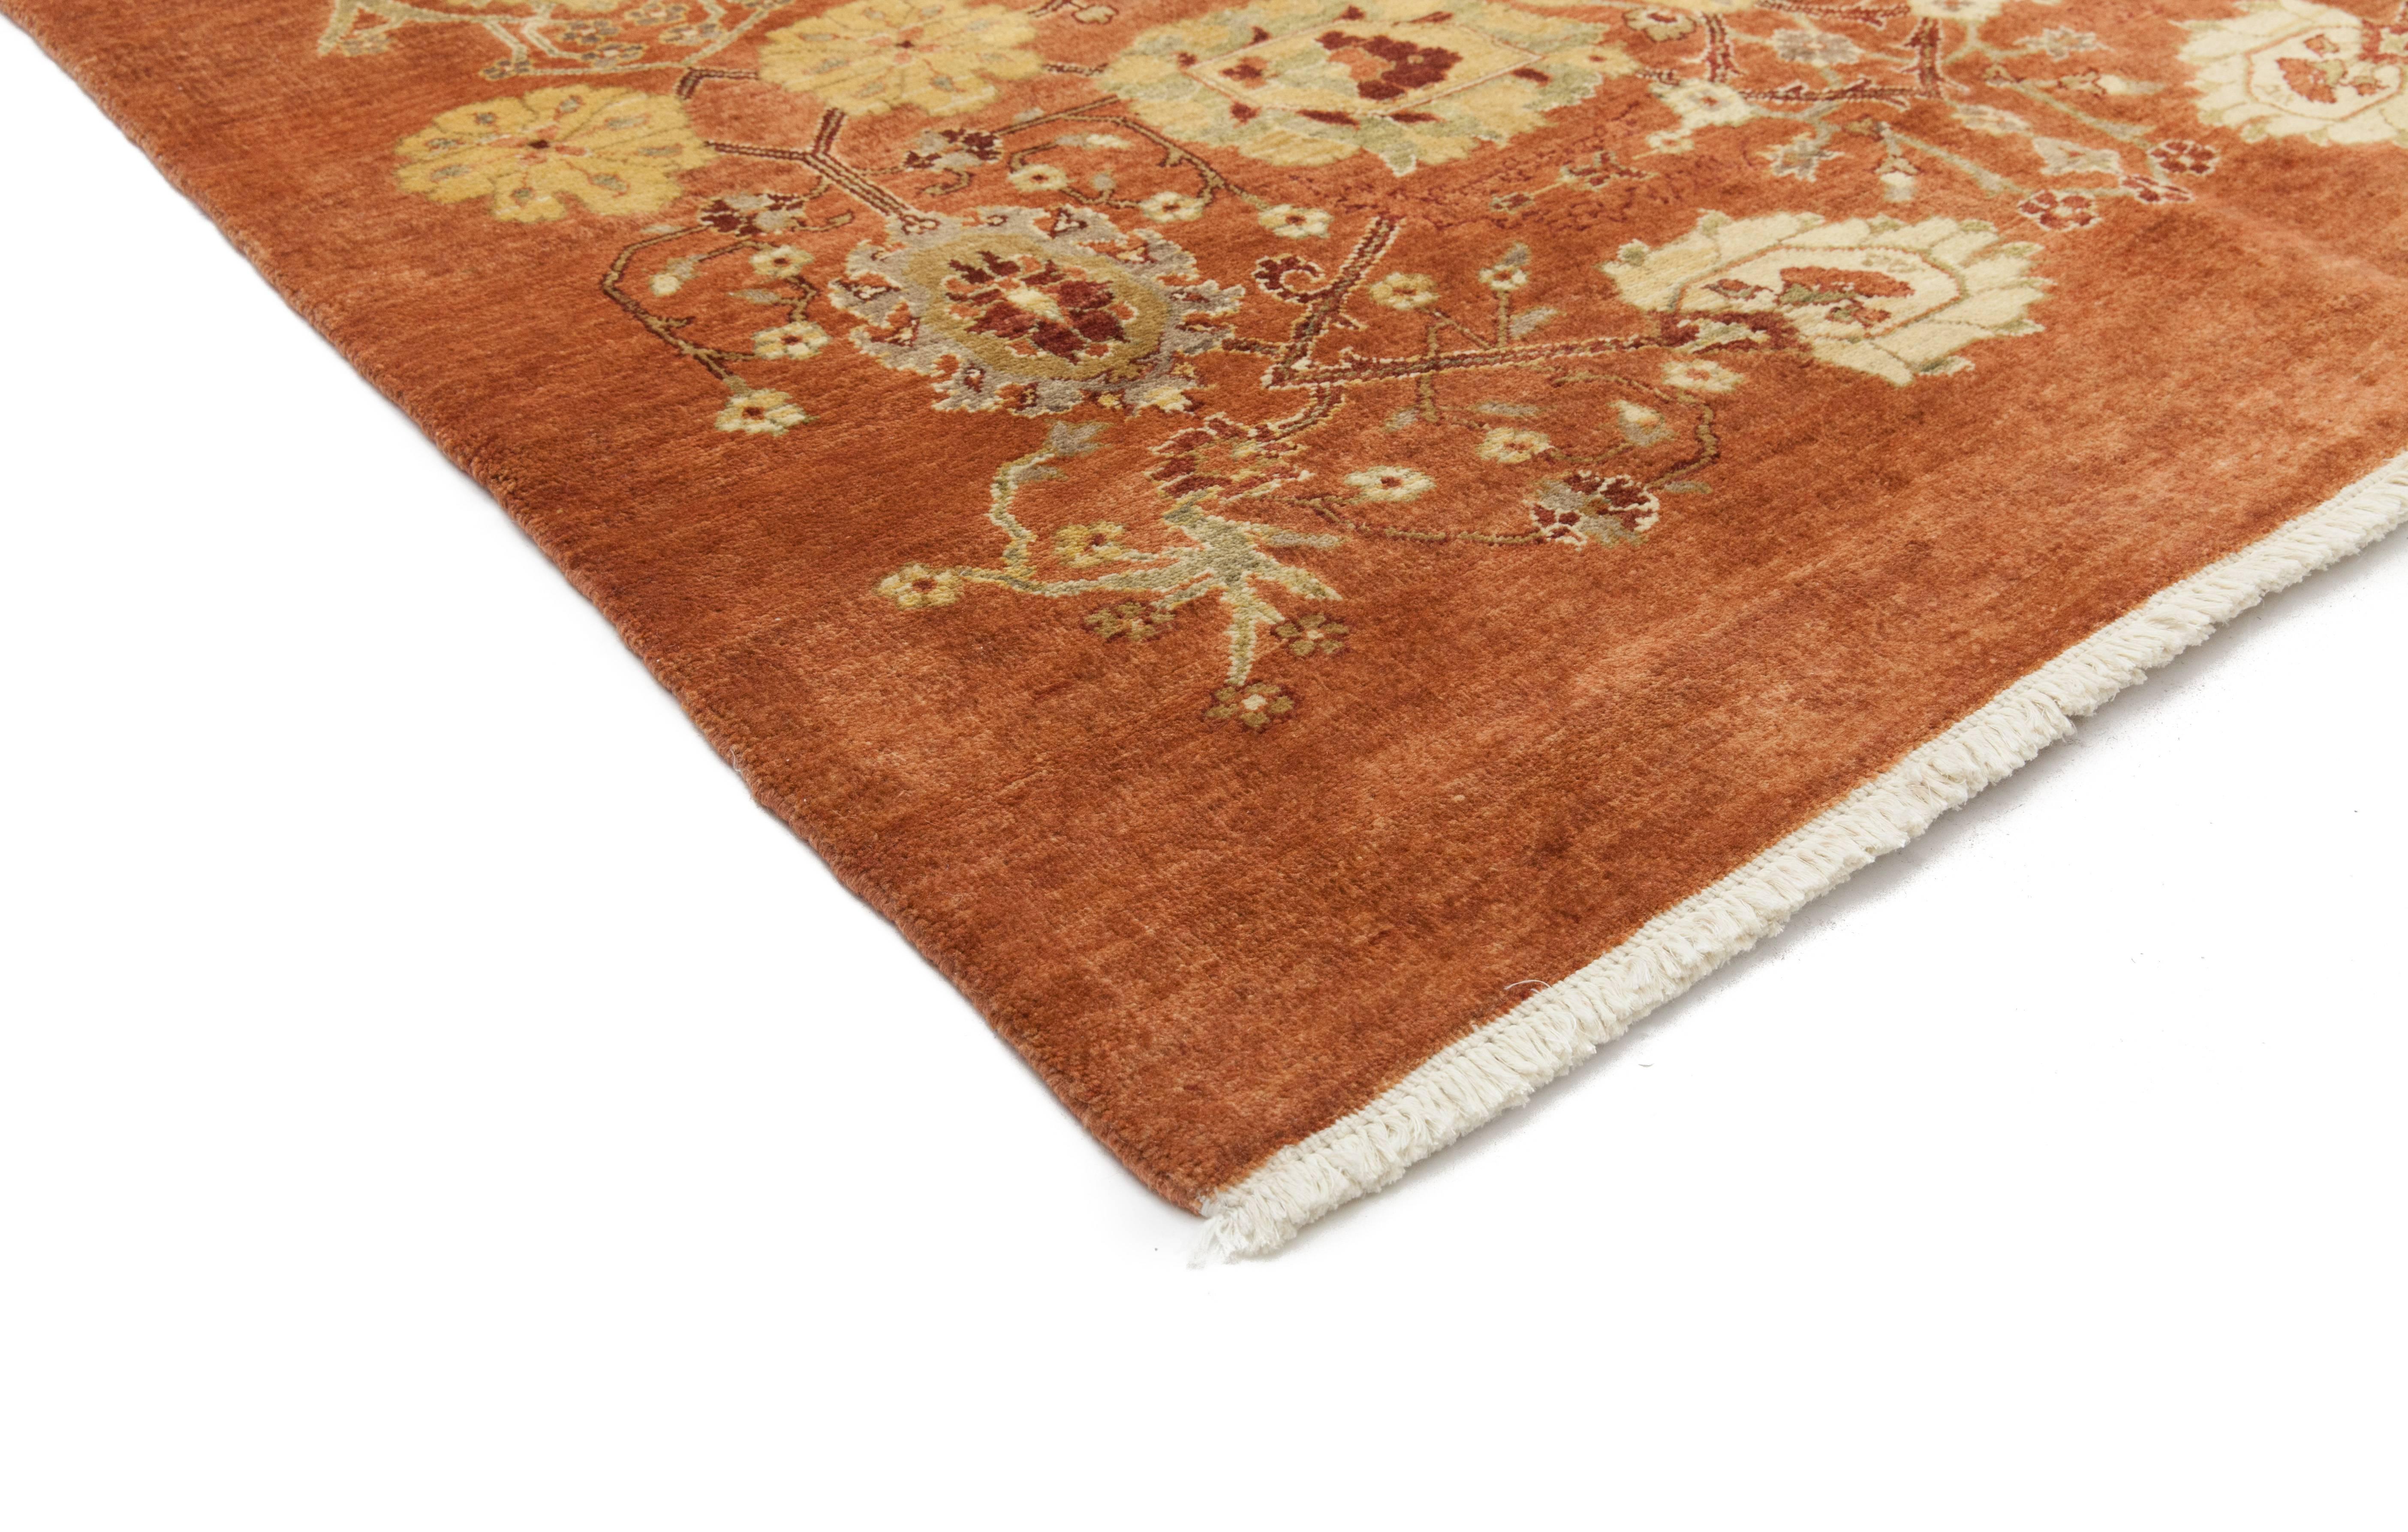 Color: Brown - Made In: Pakistan. 100% Wool. Originating centuries ago in what is now Turkey, Oushak rugs have long been sought after for their intricate patterns, lush yet subtle colors, and soft luster. These rugs continue that tradition.